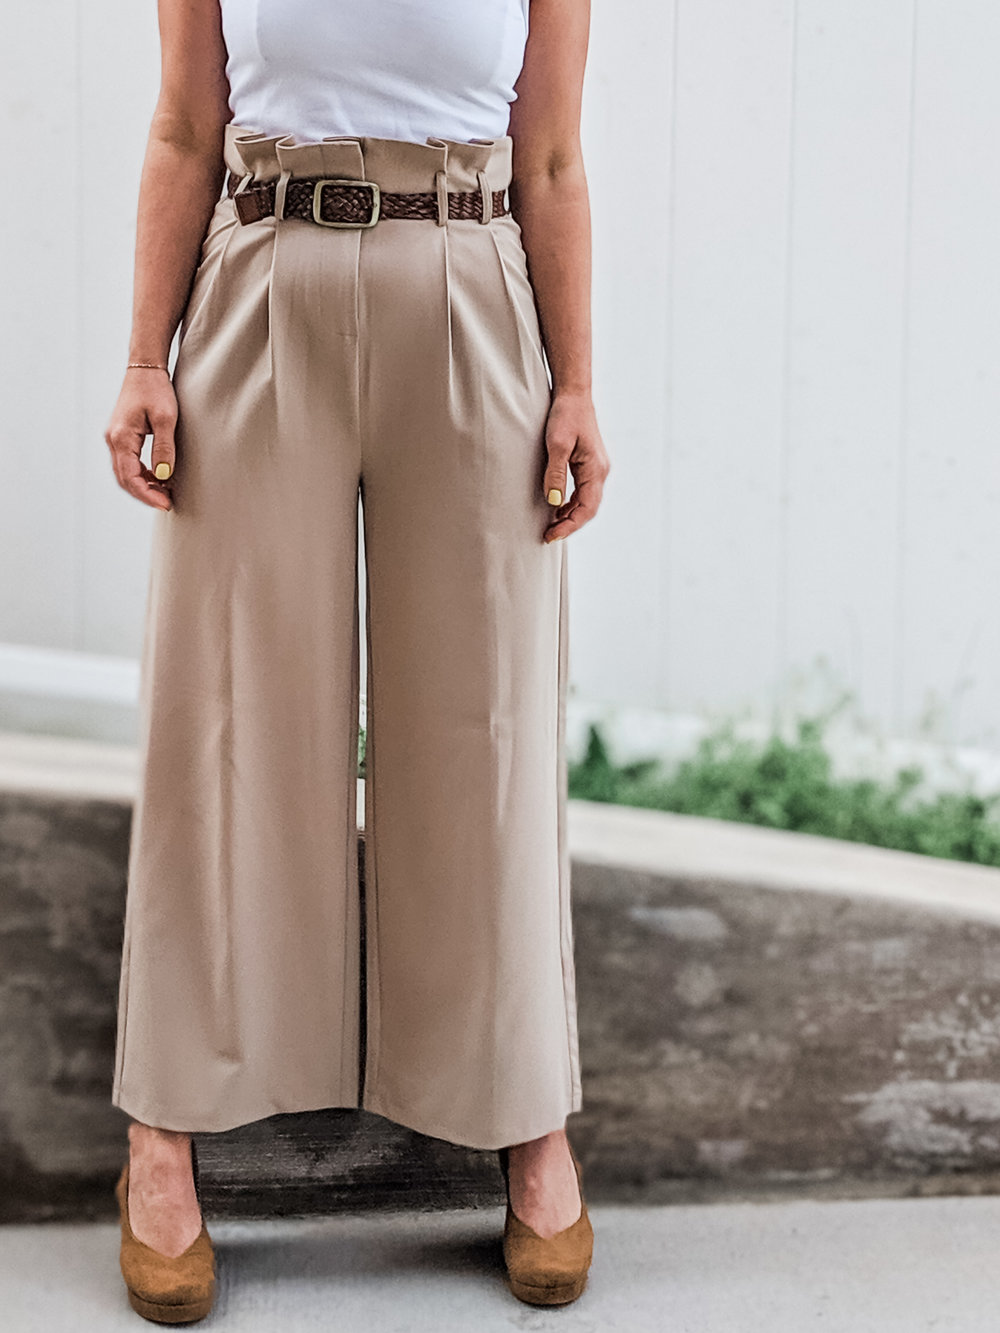 6 WAYS TO STYLE PAPER BAG PANTS — Dress For You Styling